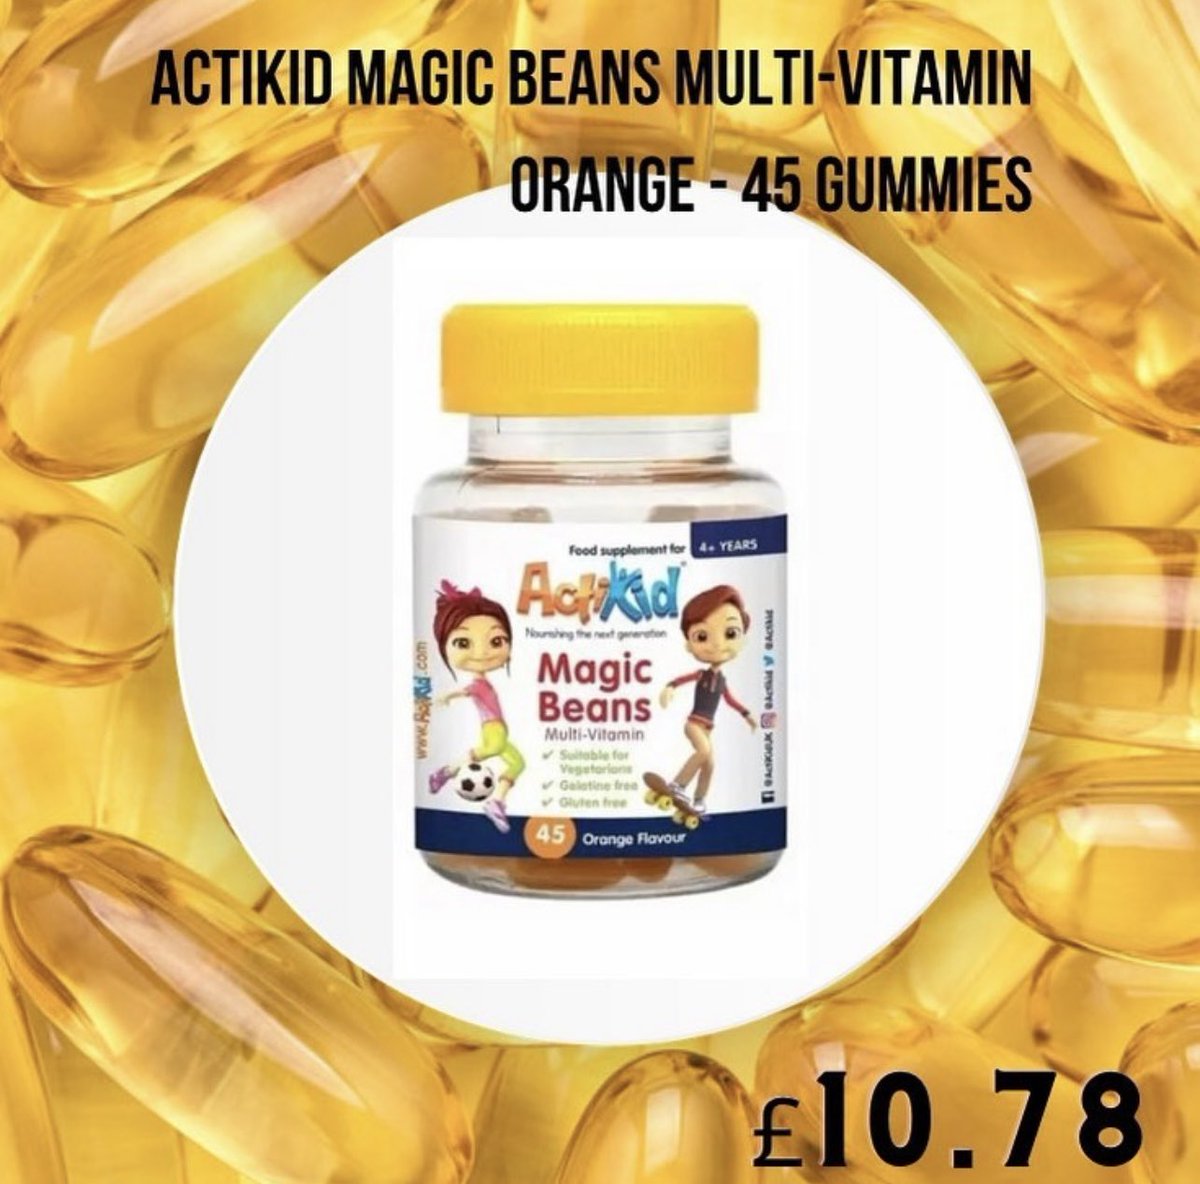 ACTIKID MAGIC BEANS MULTI-VITAMIN ORANGE - 45 GUMMIES
💥£10.78💥
hyper-fitness.co.uk
#actikid #vitamins 
#positivenutrition #supplements #nutrition #vitamins #proteins #proteinbar #proteinfood #muscle #musclebuilding #musclefood #fitness #fitnessjourney #weightgain